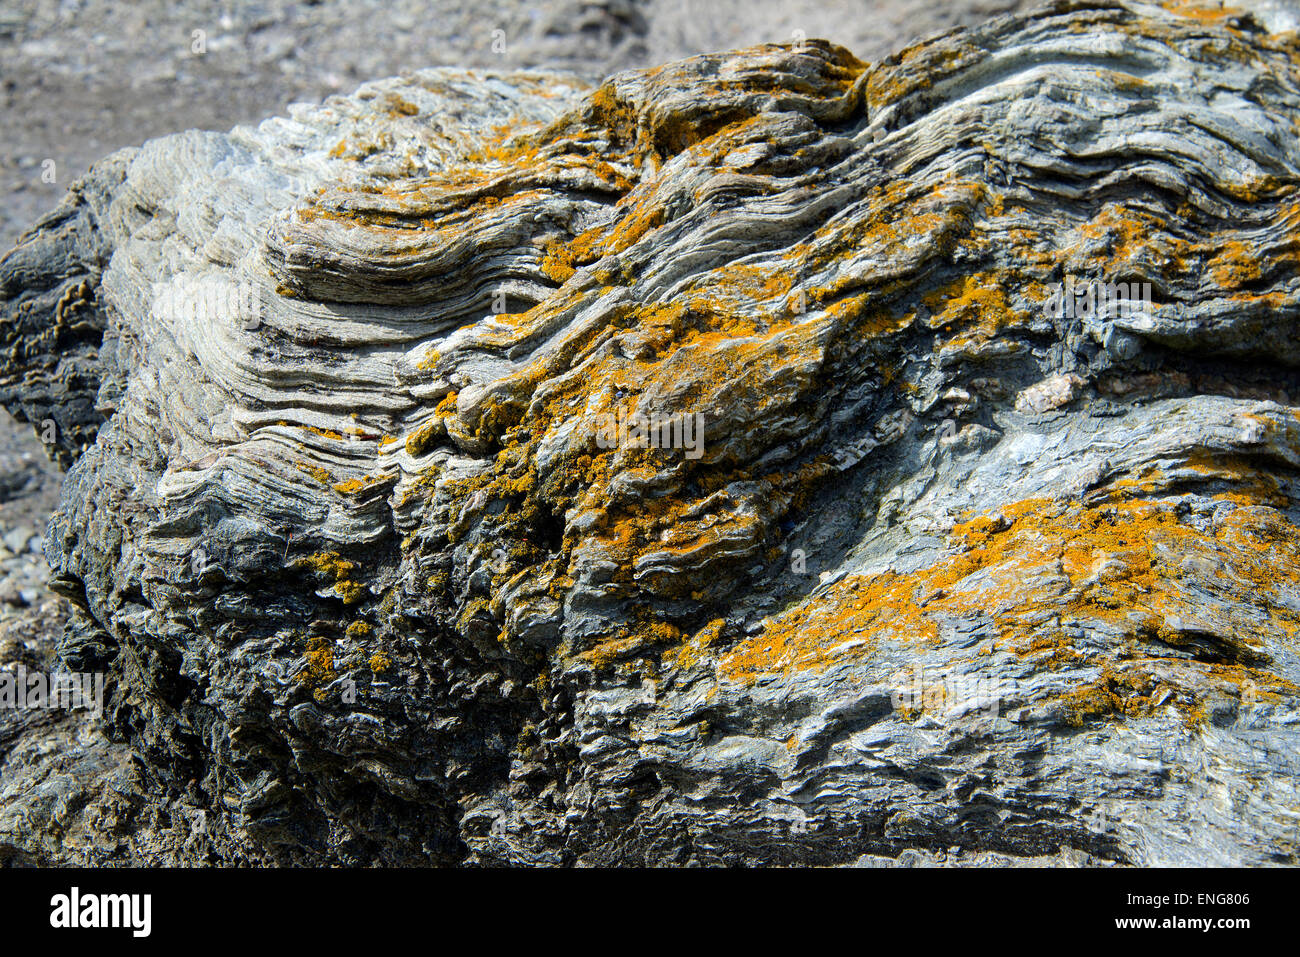 Rock formation showing intense folding in strata Tierra del Fuego Argentina Stock Photo